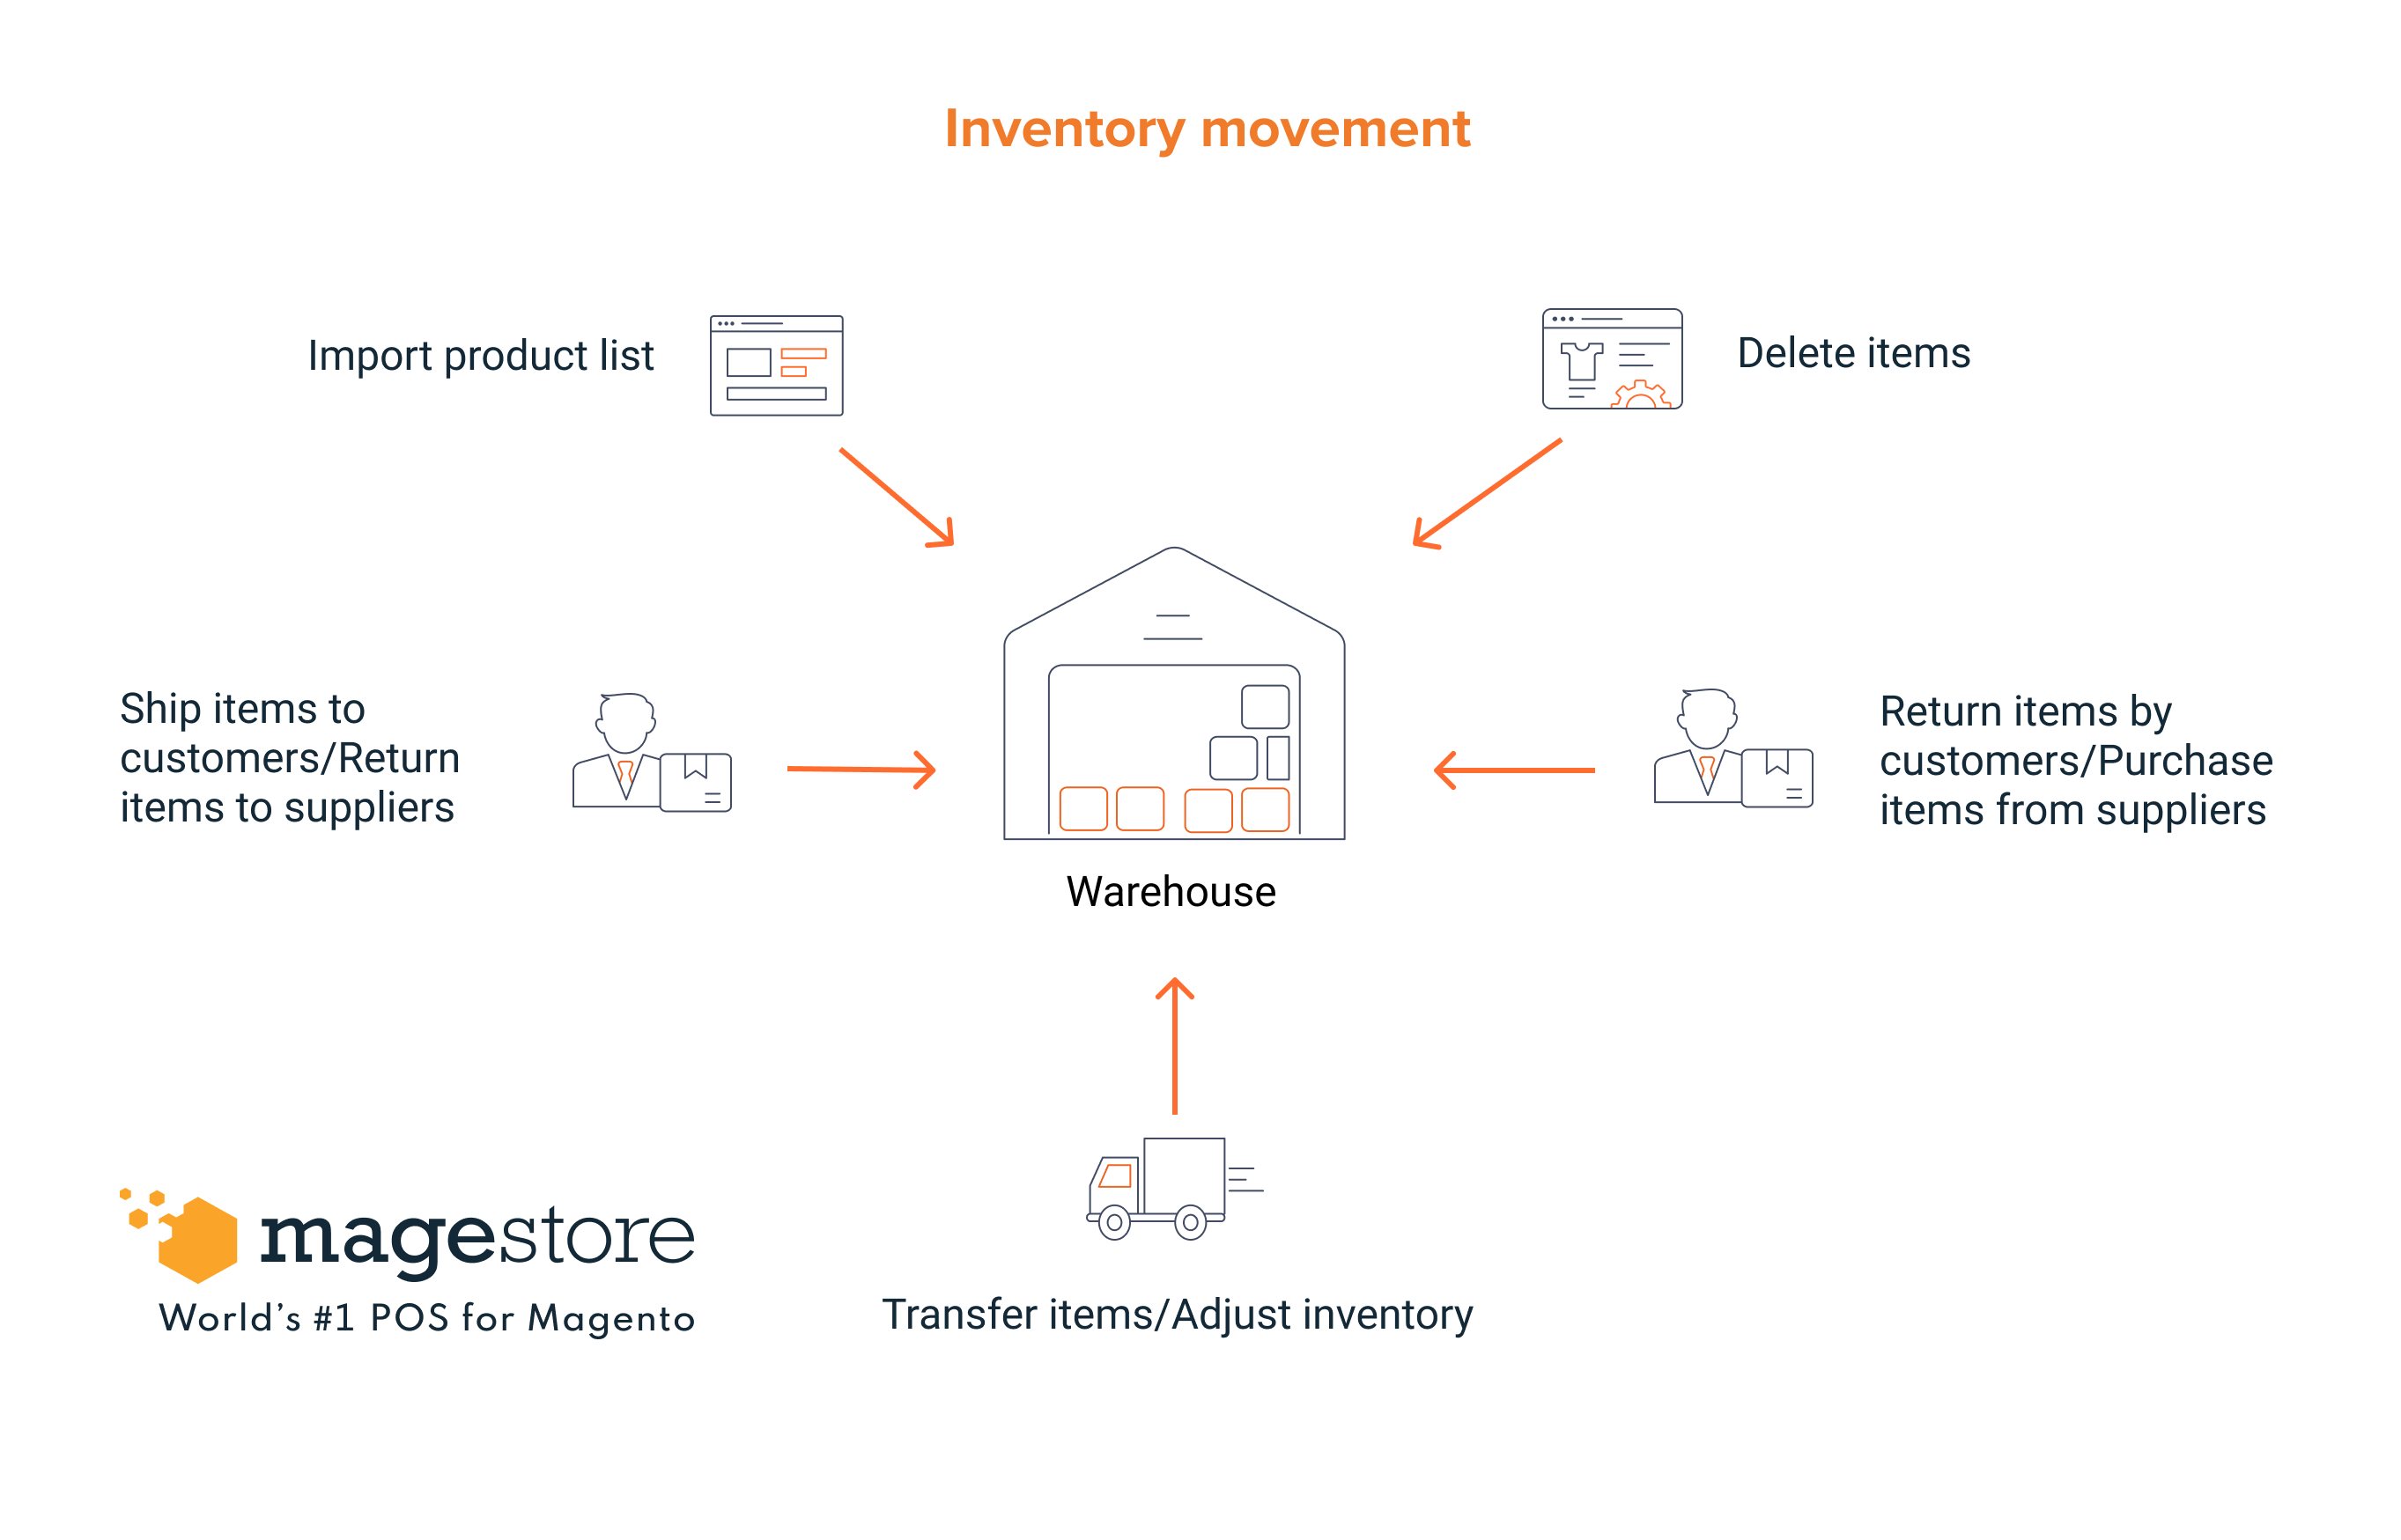 where-inventory-movement-comes-from